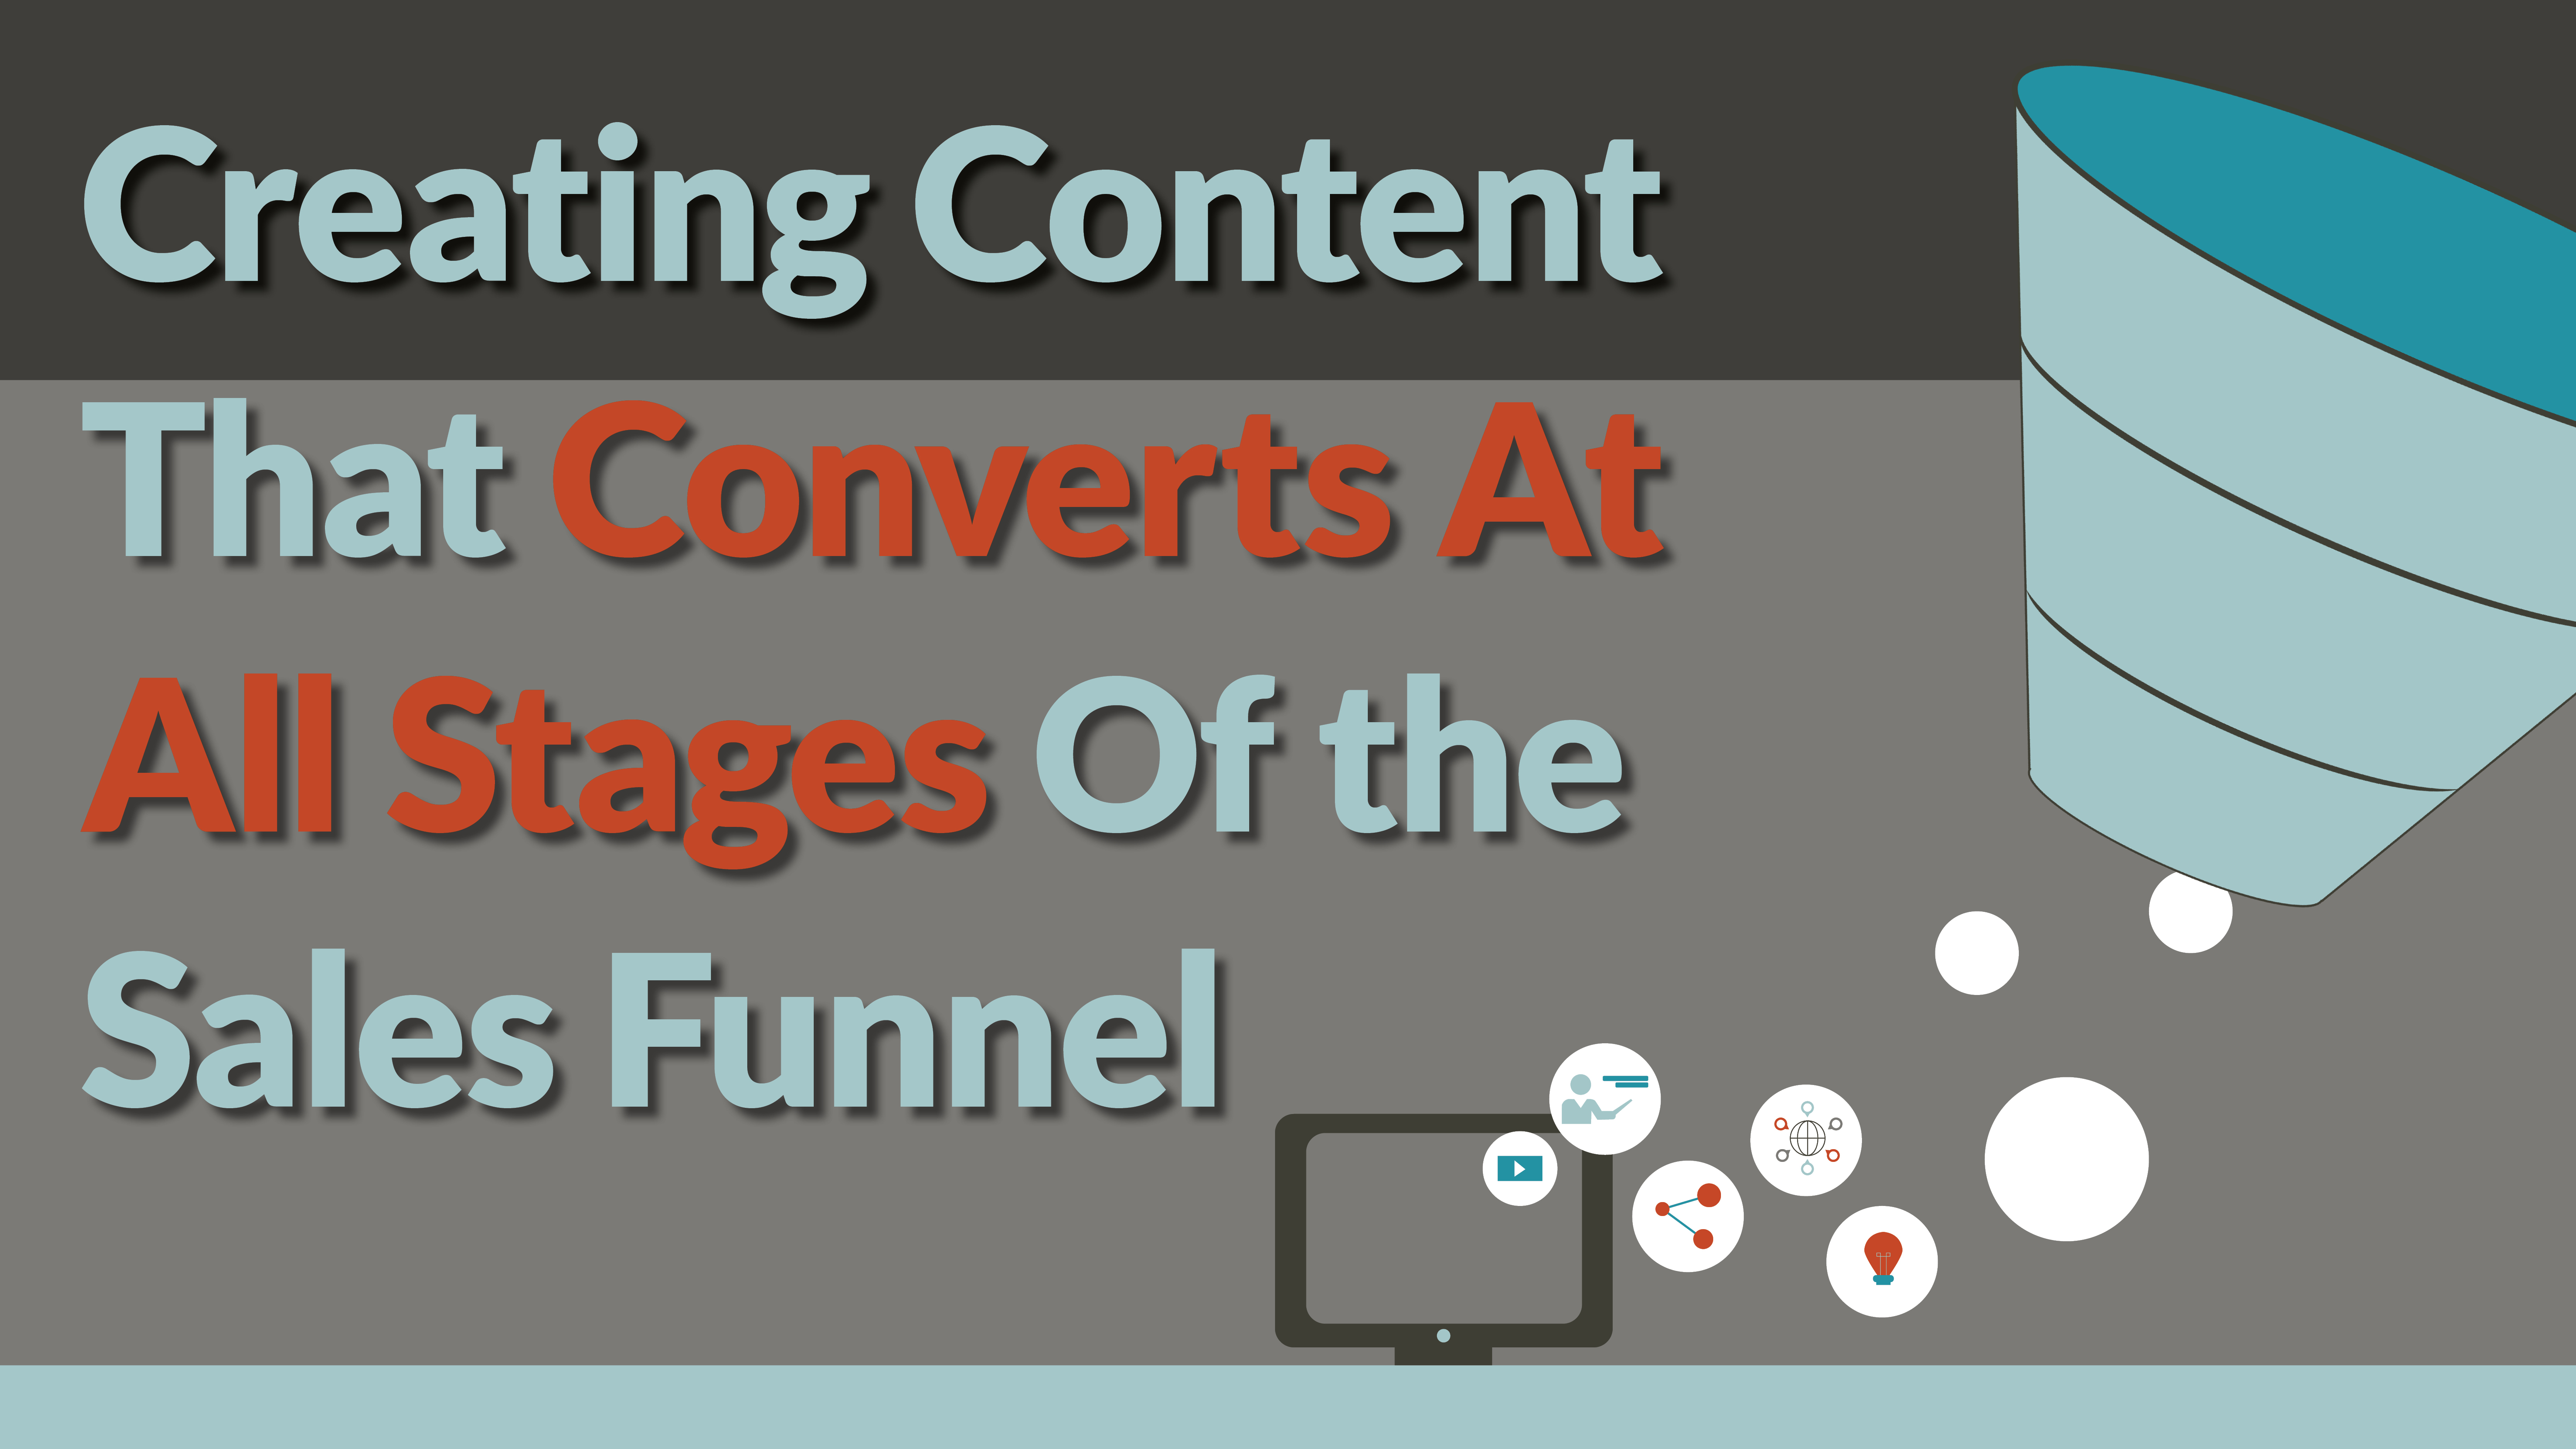 Creating Content That Converts At All Stages Of the Sales Funnel